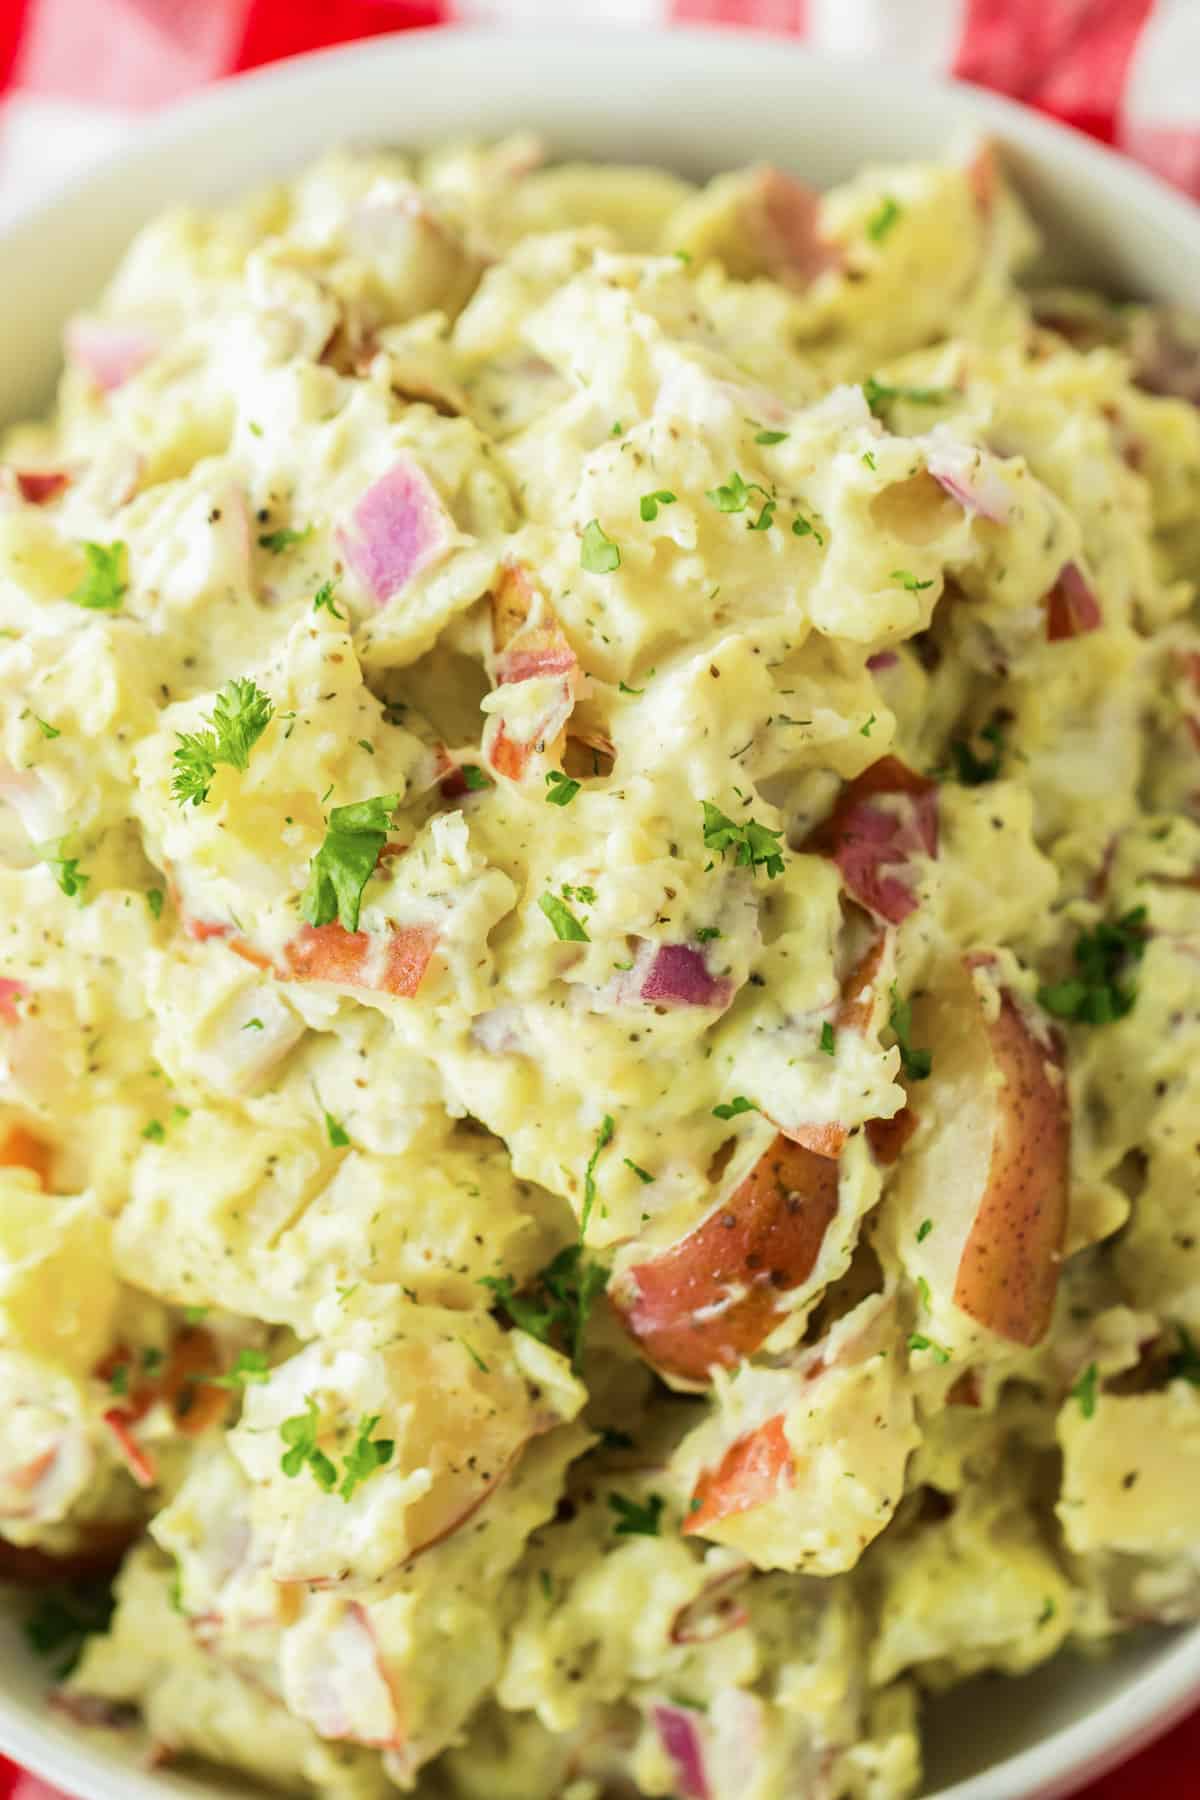 Red skinned potato salad with dill and red onion.